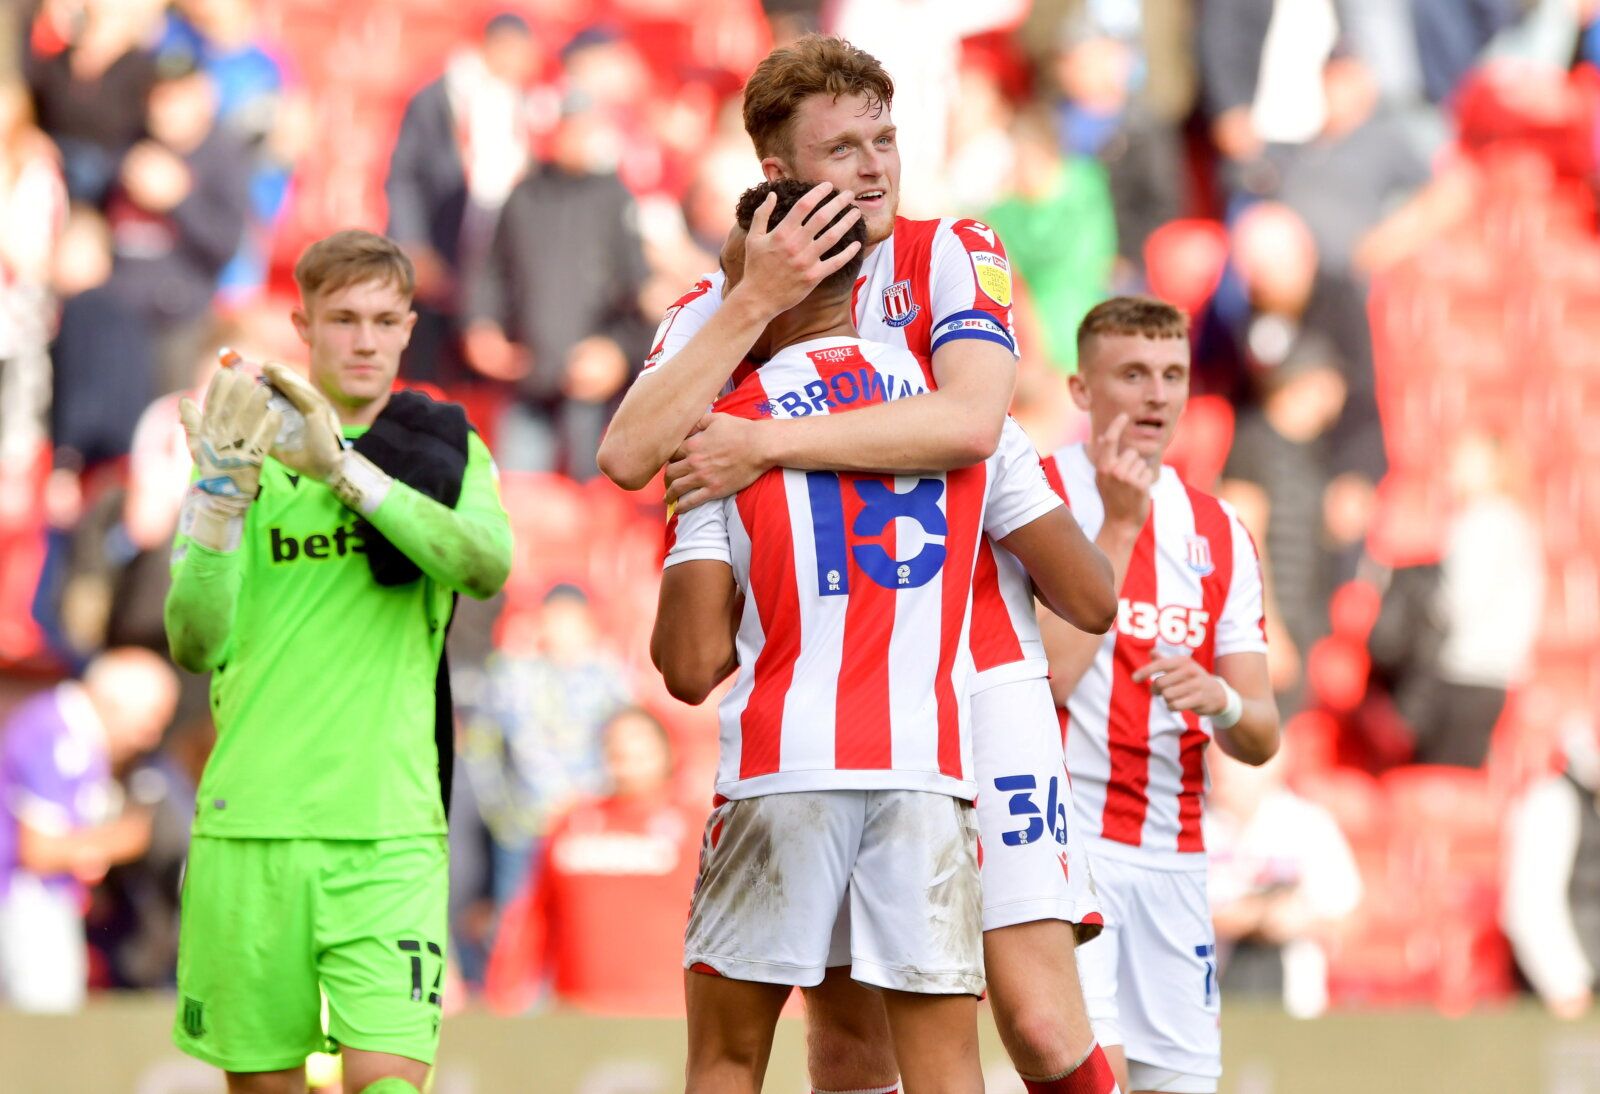 Soccer Football - Championship - Stoke City v Huddersfield Town - bet365 Stadium, Stoke-on-Trent, Britain - September 11, 2021 Stoke City's Jacob Brown celebrates with Harry Souttar after the match  Action Images/Paul Burrows  EDITORIAL USE ONLY. No use with unauthorized audio, video, data, fixture lists, club/league logos or 